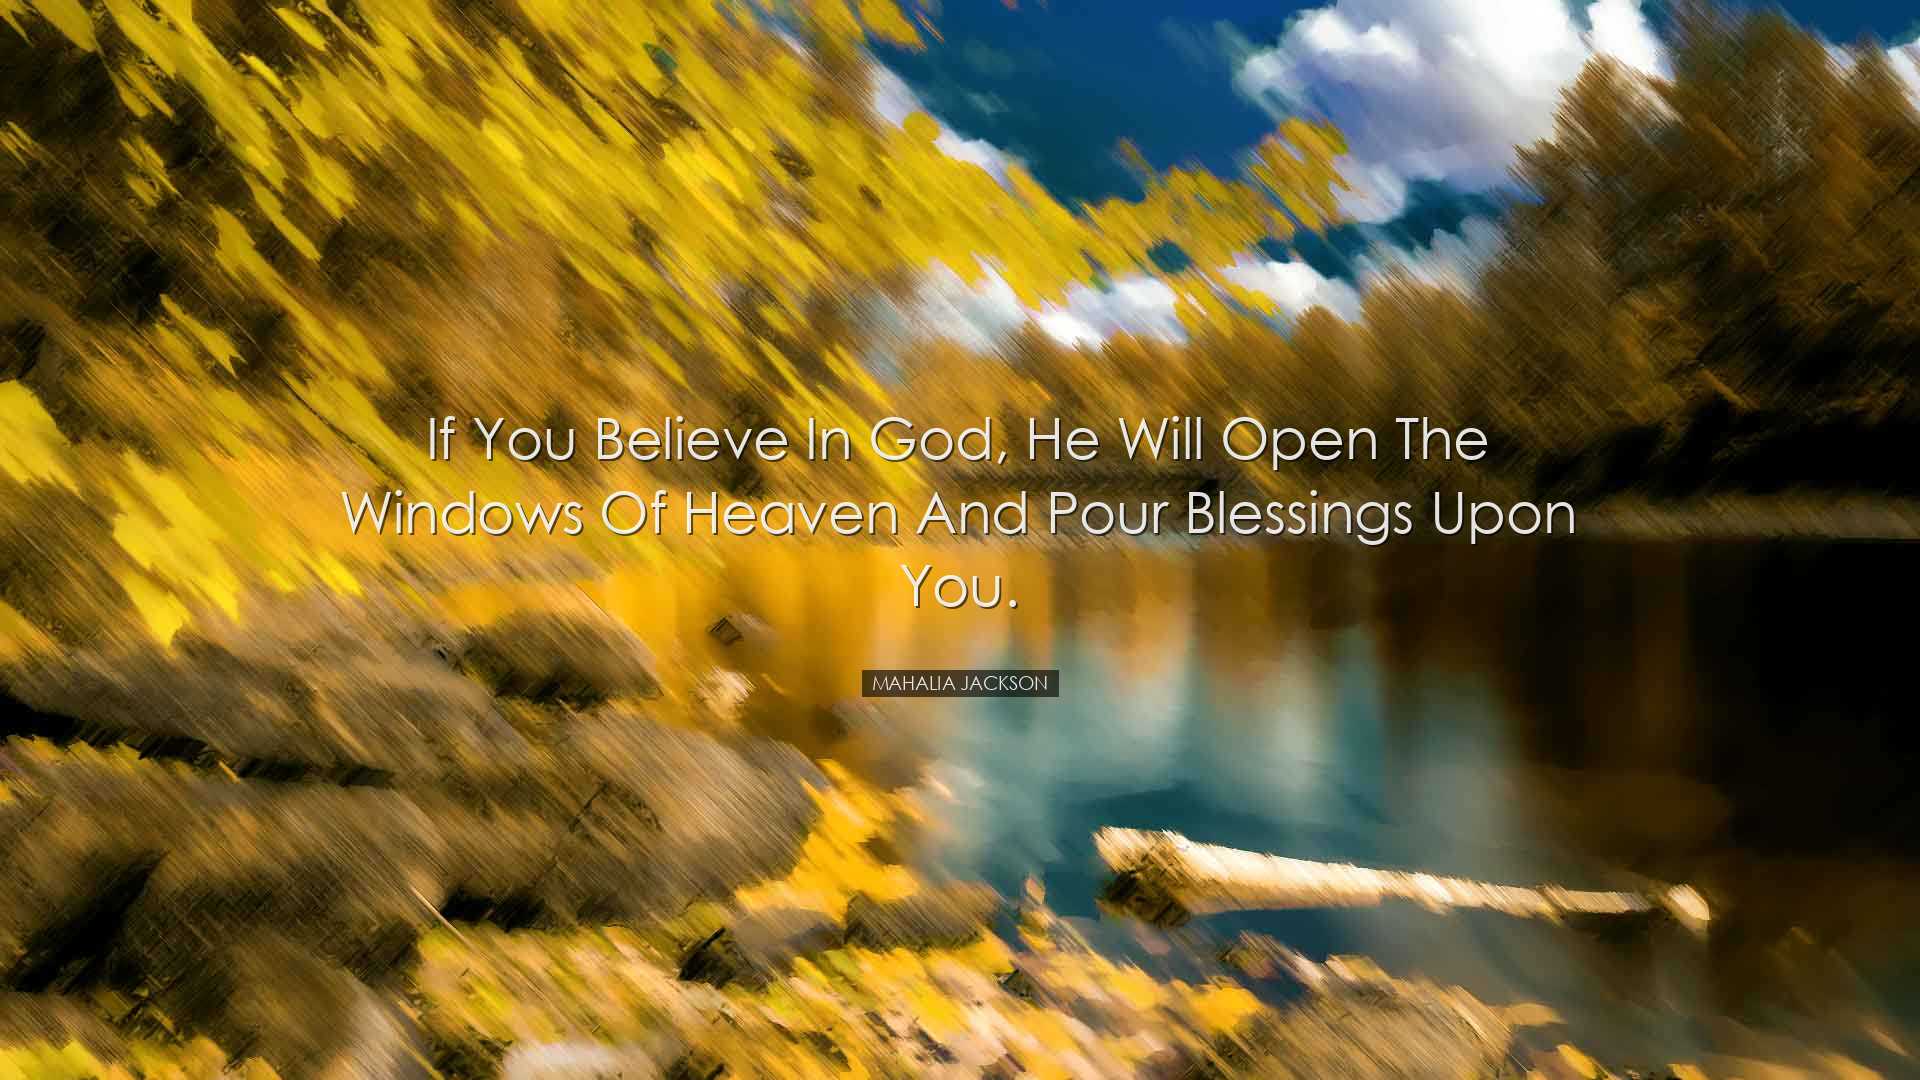 If you believe in God, He will open the windows of heaven and pour